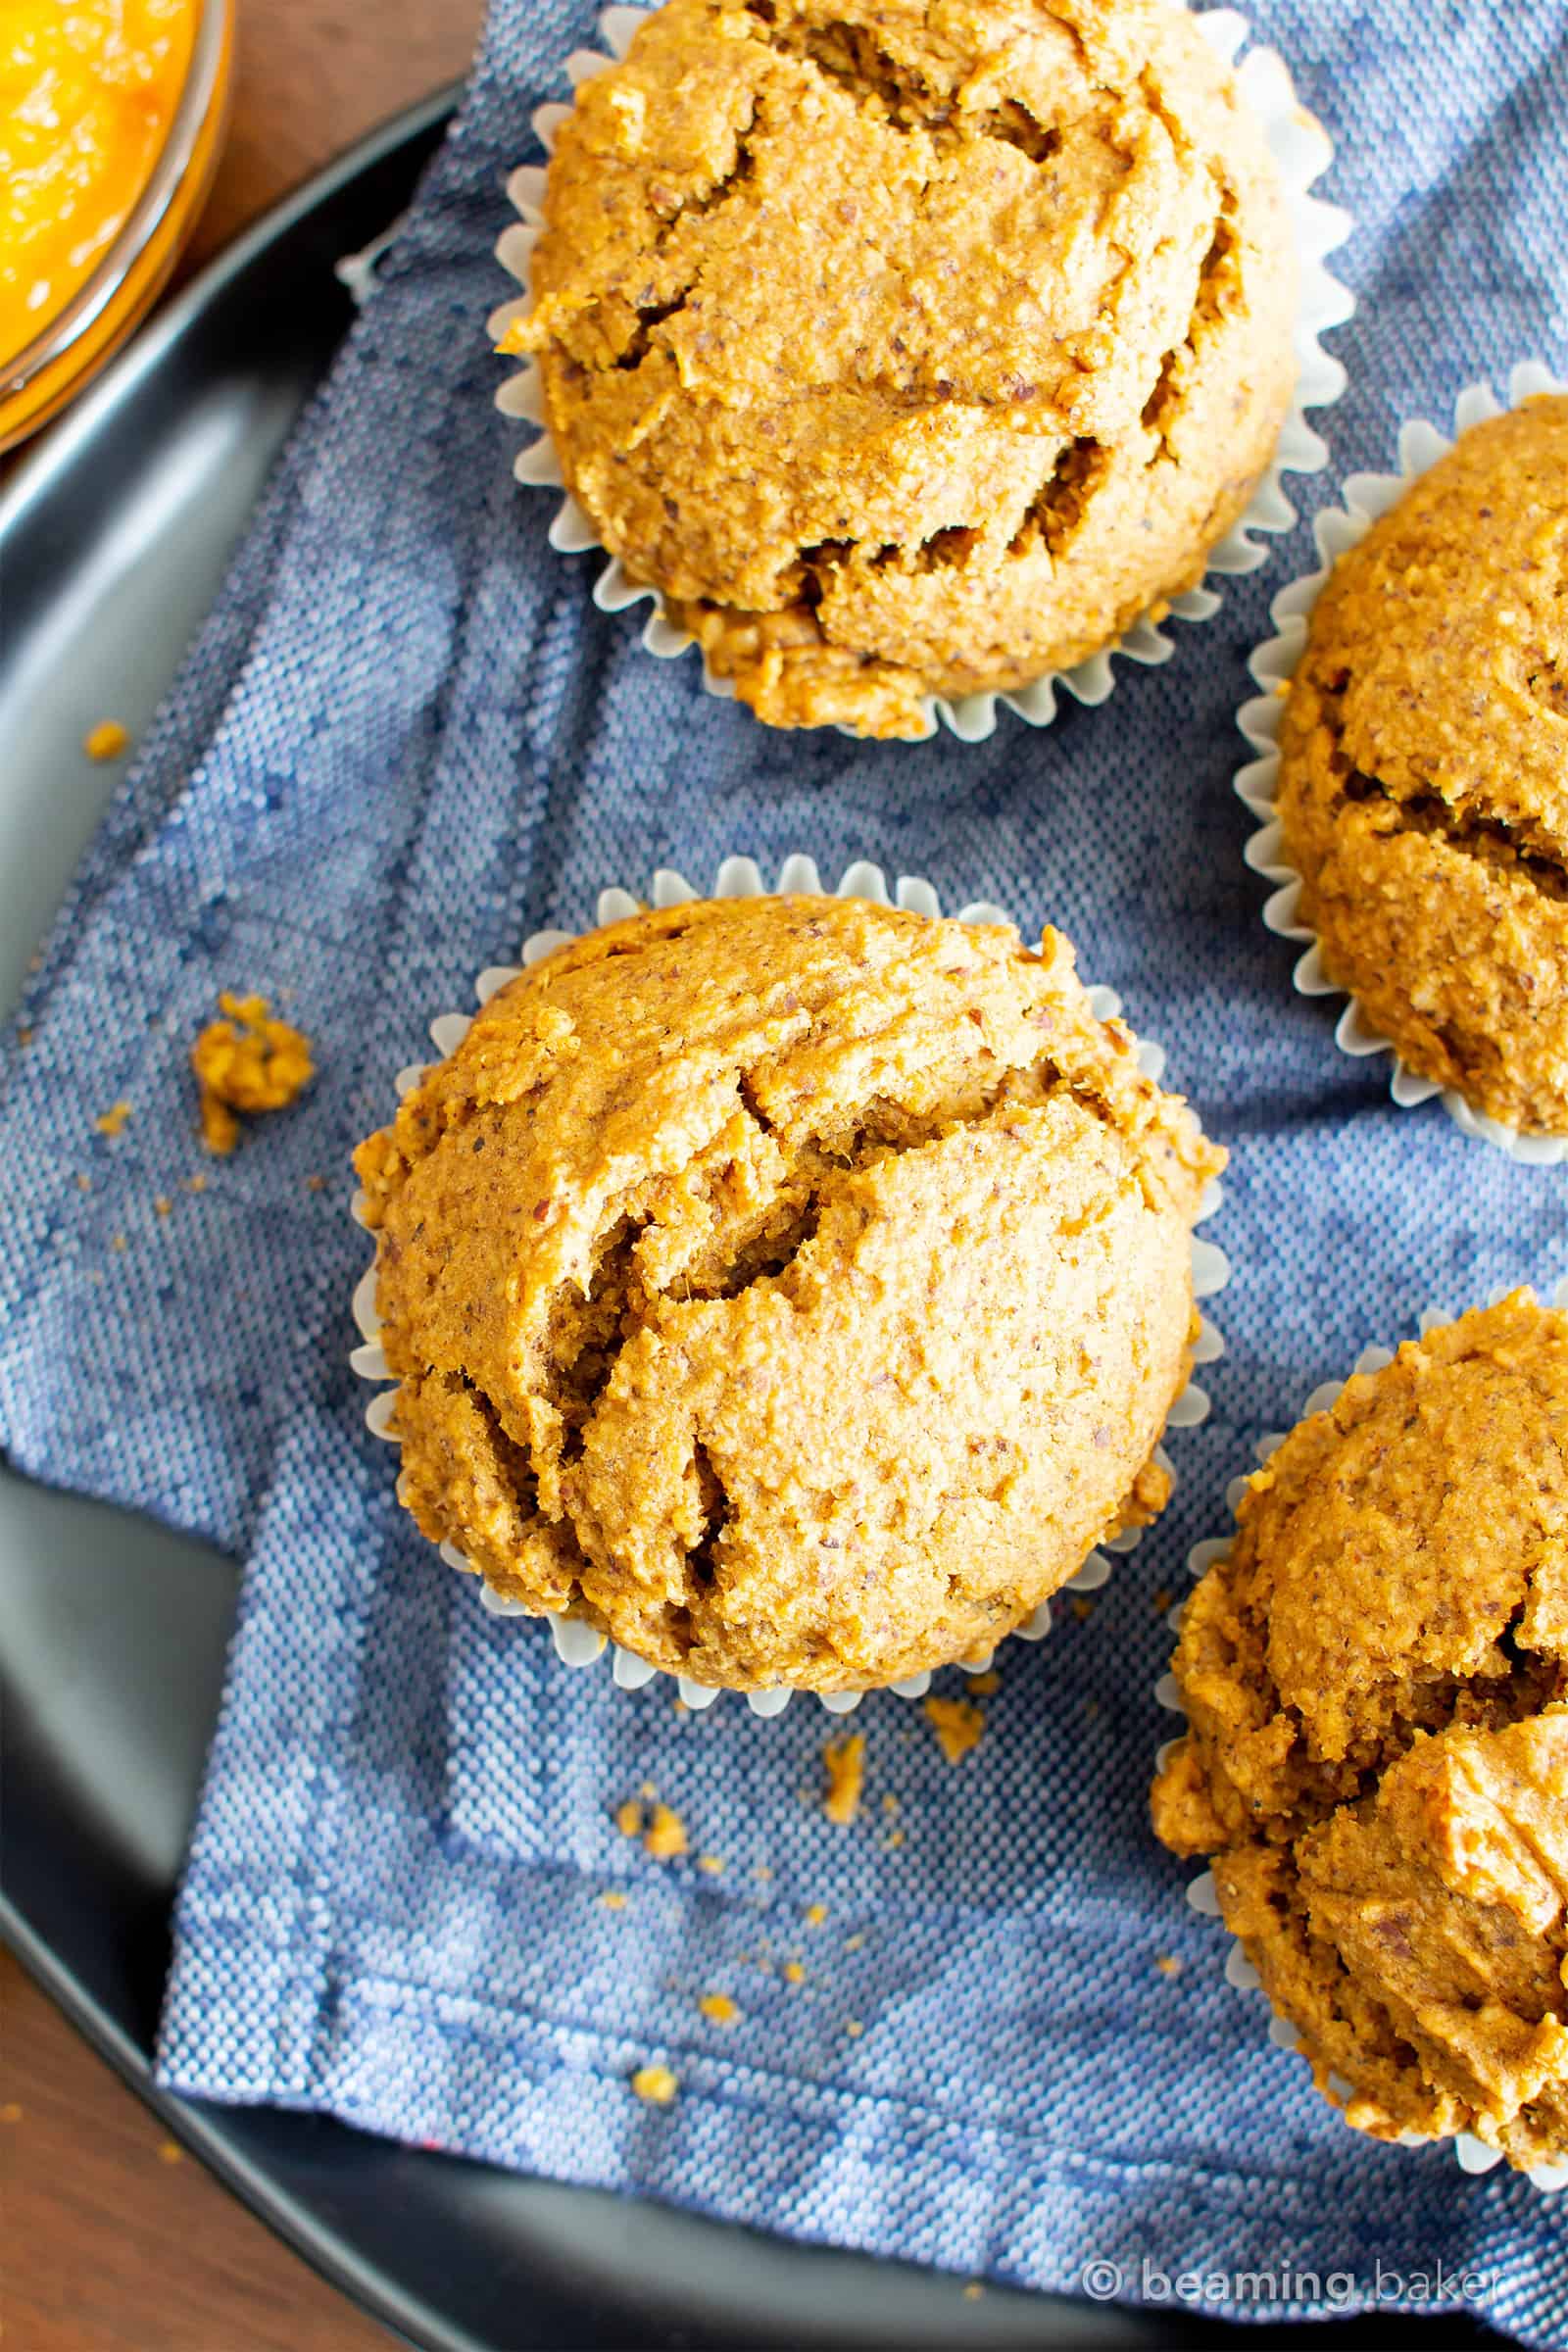 Easy Vegan Gluten Free Pumpkin Muffins Recipe (V, GF): an easy recipe for moist ‘n fluffy pumpkin muffins bursting with your favorite fall spices. Made with healthy, whole ingredients. #Vegan #GlutenFree #Pumpkin #Muffins #PumpkinSpice #DairyFree #Healthy #Fall #RefinedSugarFree | Recipe at BeamingBaker.com